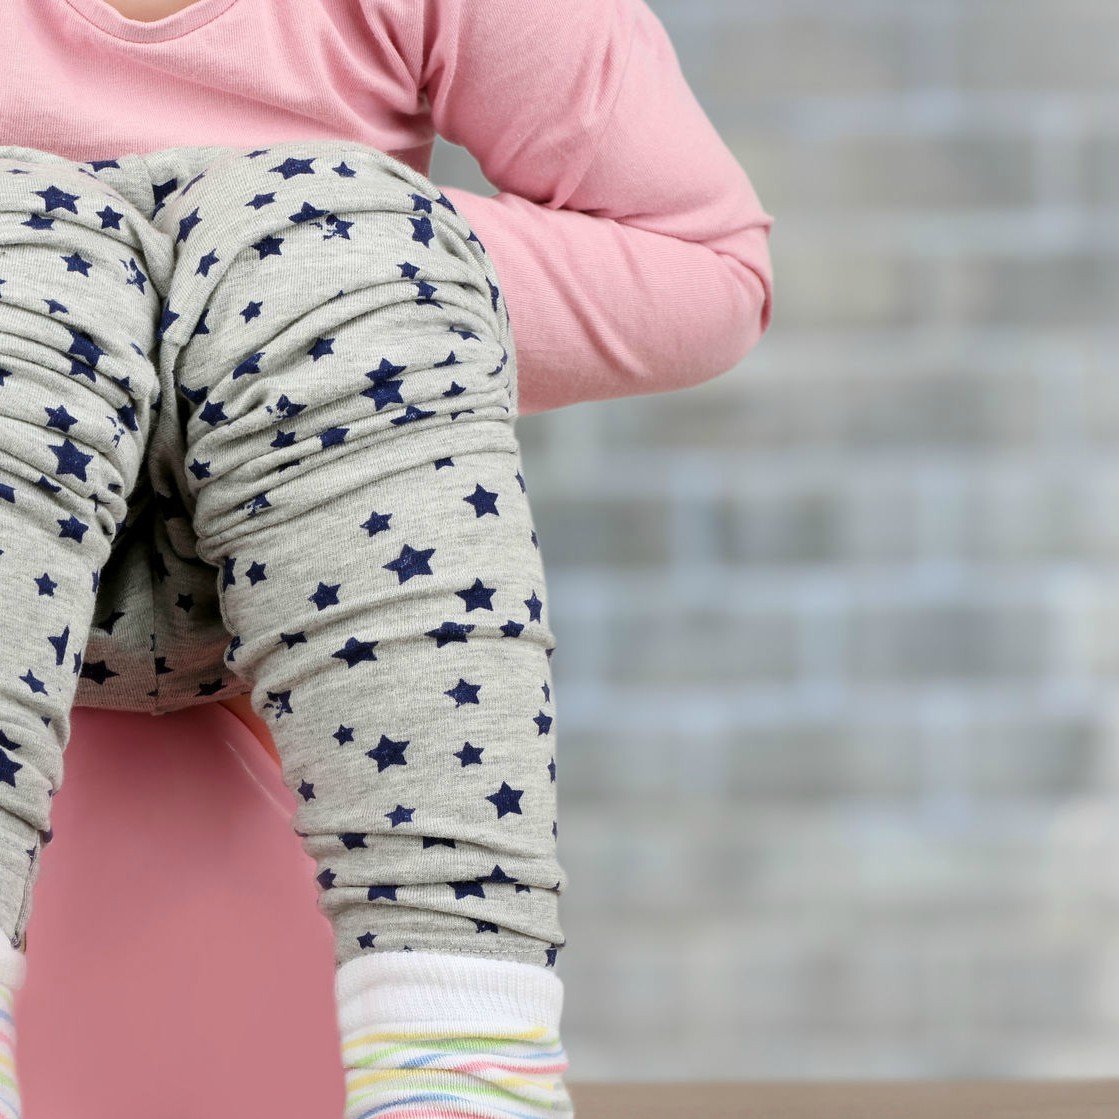 Ditch The Diapers: 5 Signs Your Toddler Is Ready For the Potty